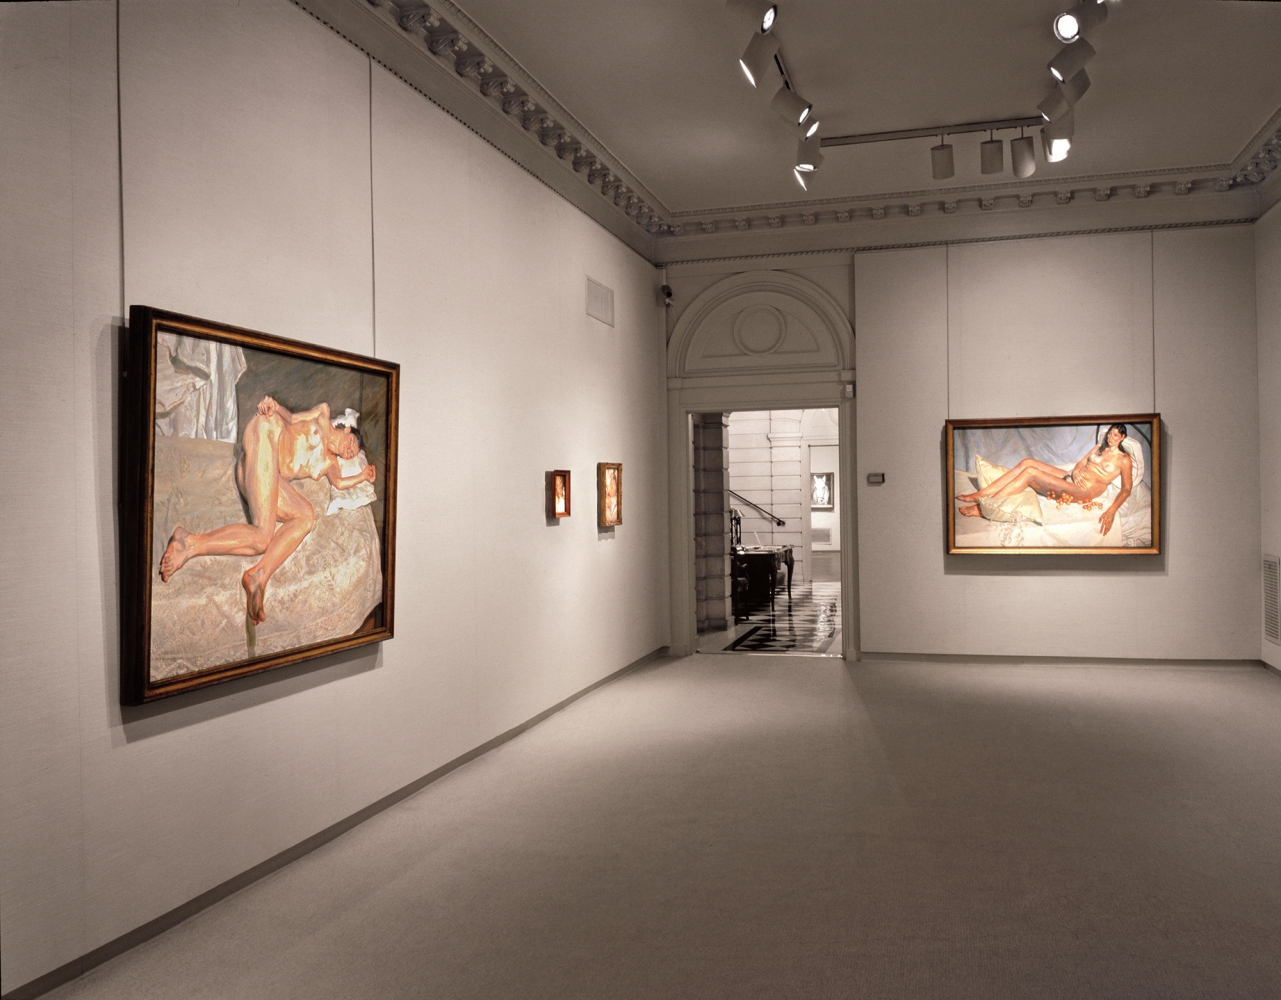 Installation view of Lucian Freud: Recent Work, April 10 - May 19, 2000. Art © The Lucian Freud Archive / Bridgeman Images.